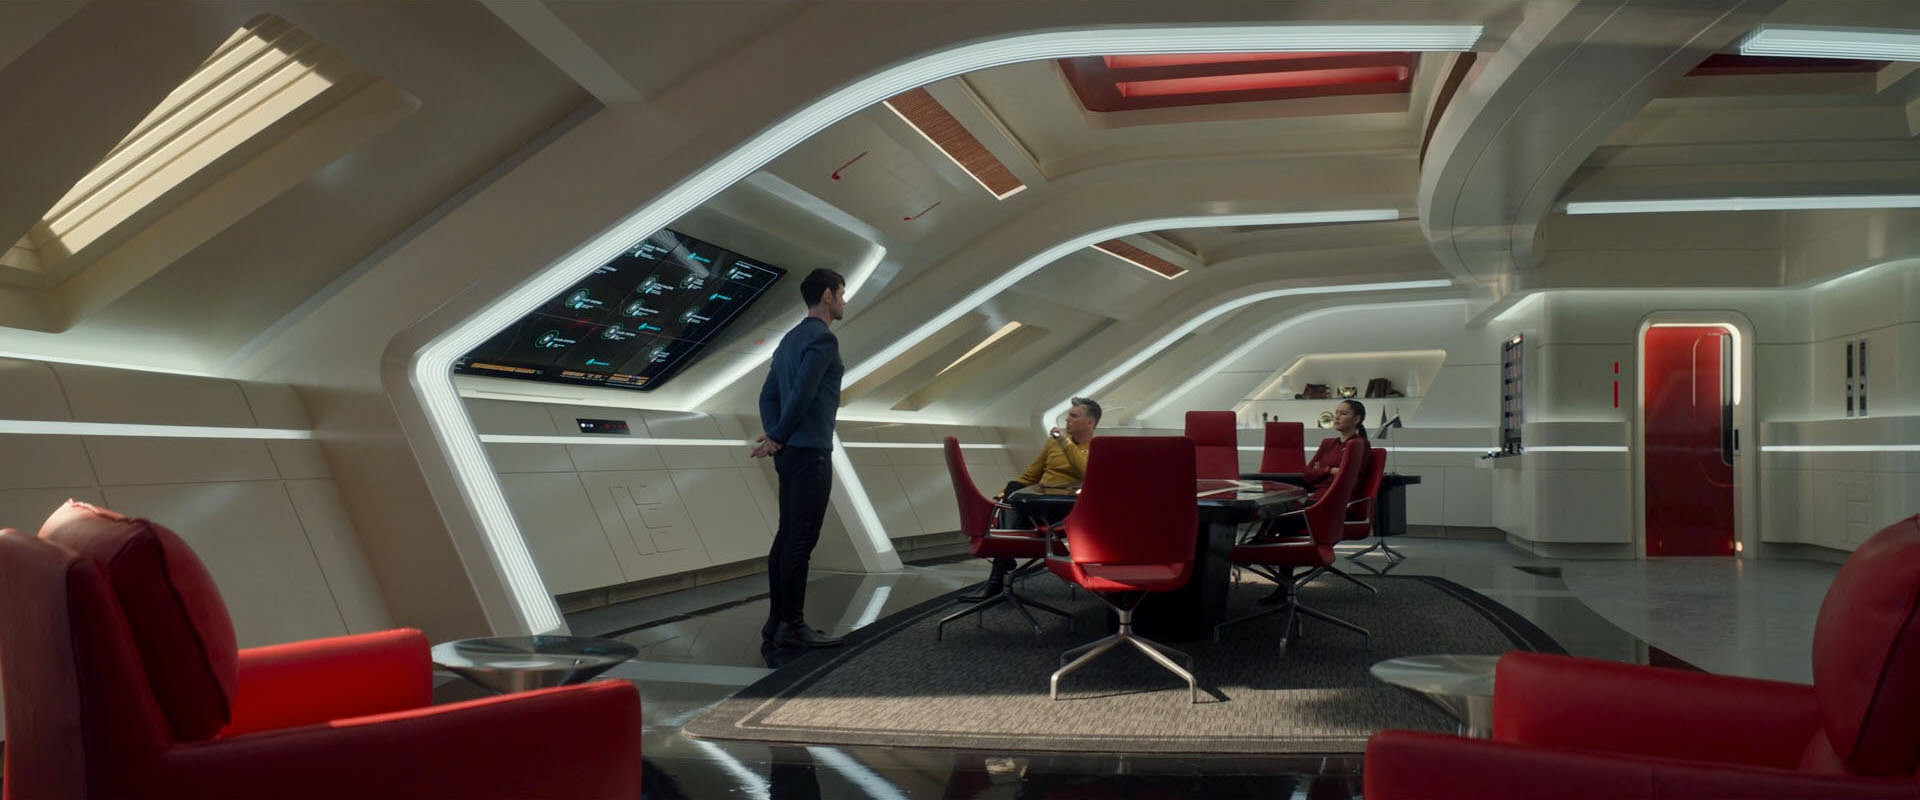 Ex Astris Scientia - Commercially Available Chairs in Star Trek